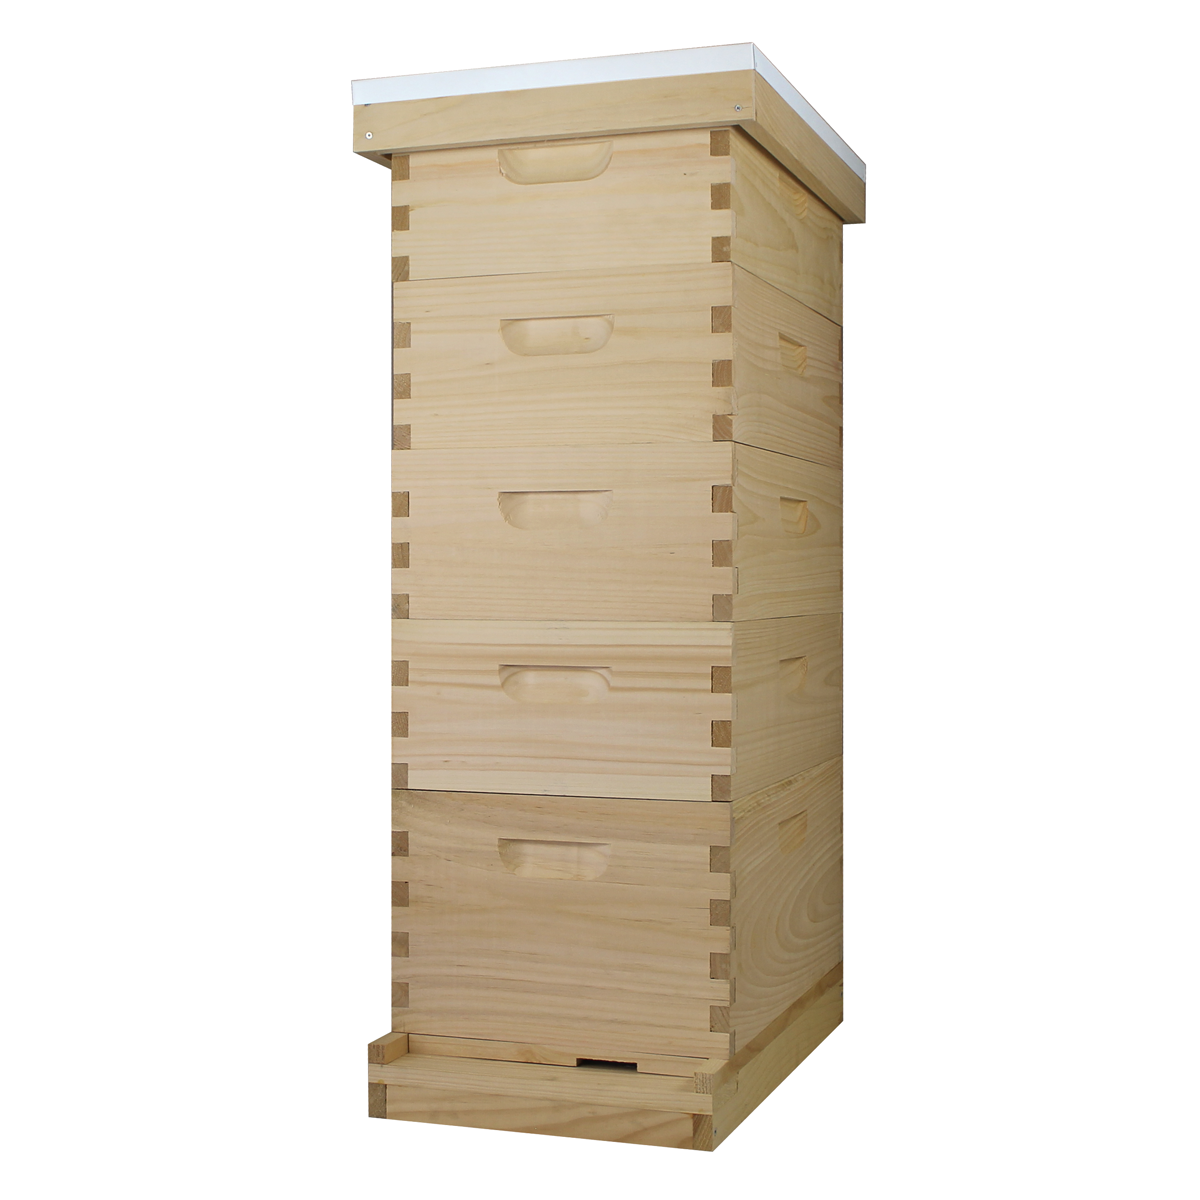 Busy Bees 'N' More Amish Made 8 Frame Beehive With 1 Deep Bee Box & 4 Medium Bee Boxes